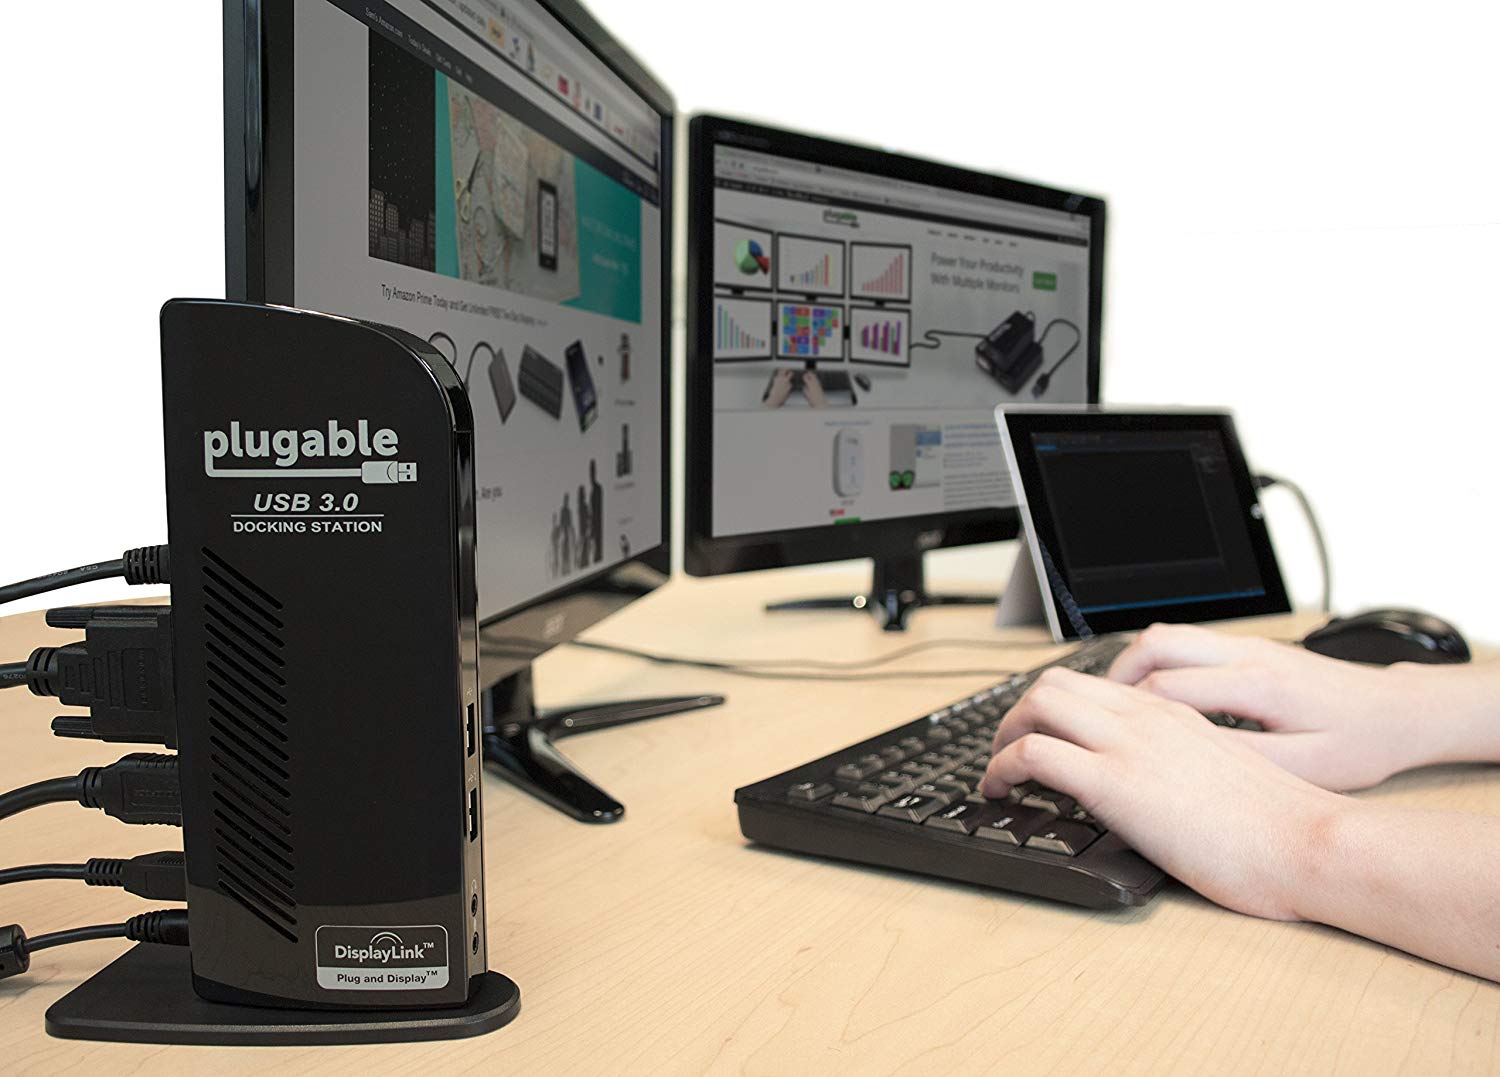 Find out what we discovered during our Plugable USB 3.0 Universal Laptop Do...